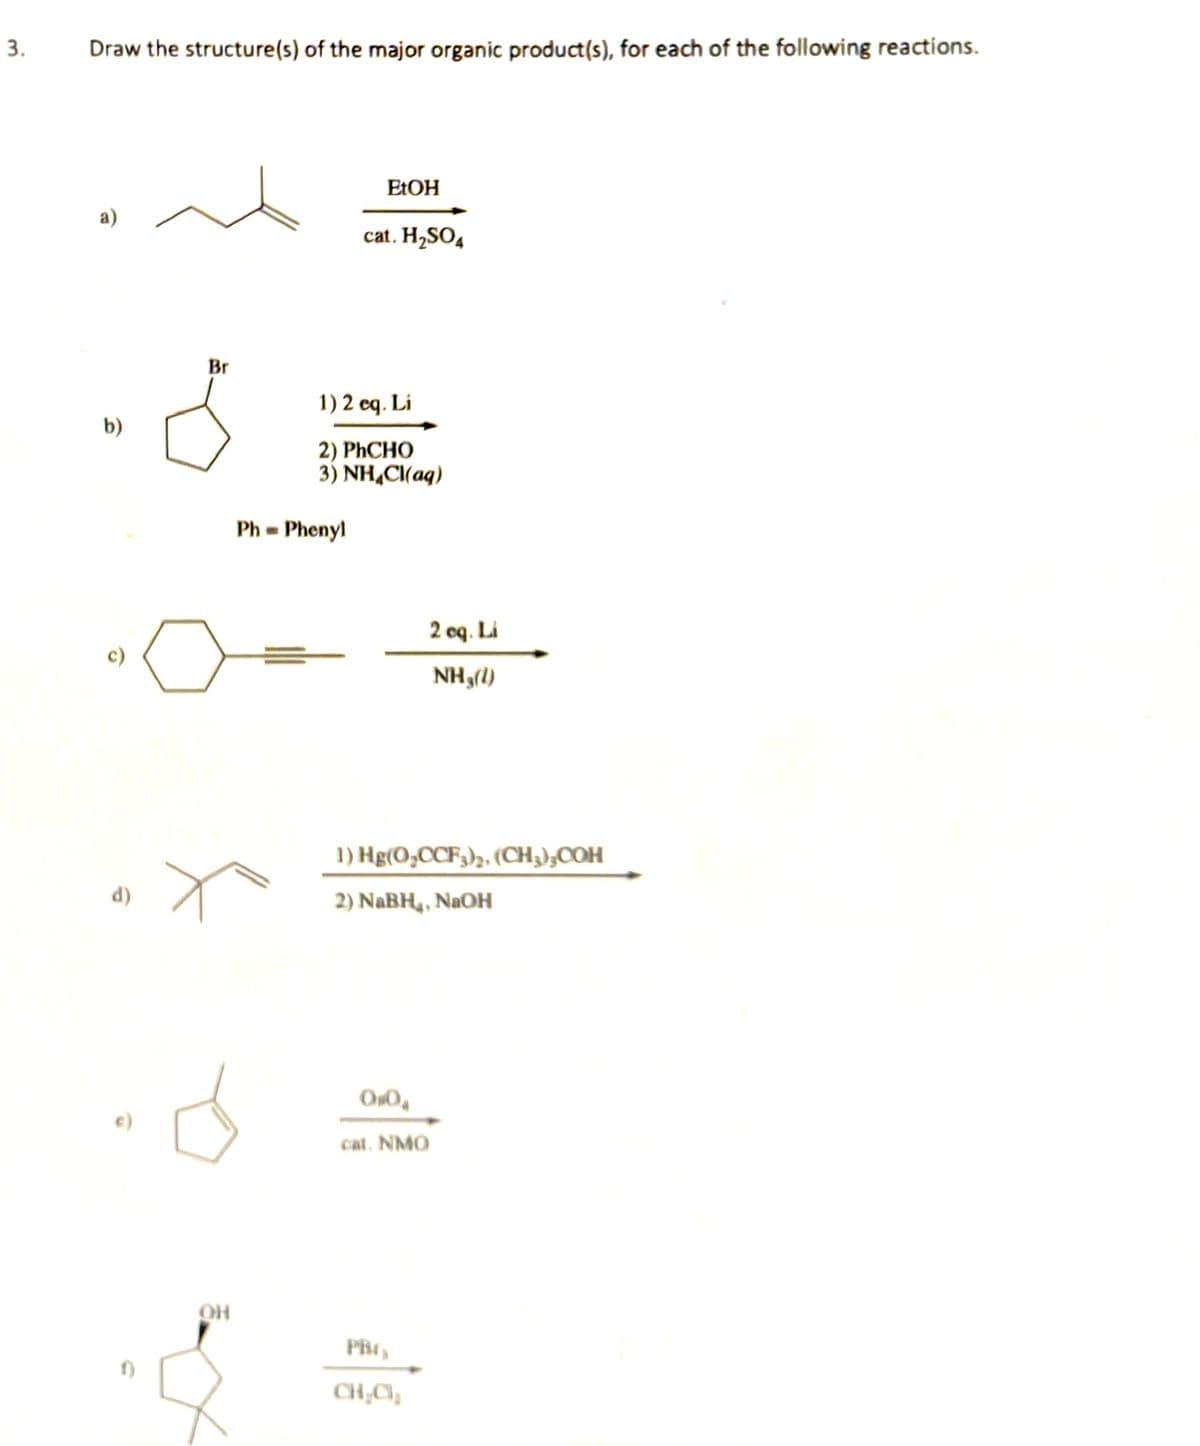 3.
Draw the structure(s) of the major organic product(s), for each of the following reactions.
ELOH
cat. H,SO,
Br
1) 2 eq. Li
b)
2) PHCHO
3) NH,C(ag)
Ph = Phenyl
2 oq. Li
c)
NH,(1)
1) Hg(O,CCF3)z, (CH,);COH
d)
2) NABH,, NAOH
cat. NMO
CH;C),
